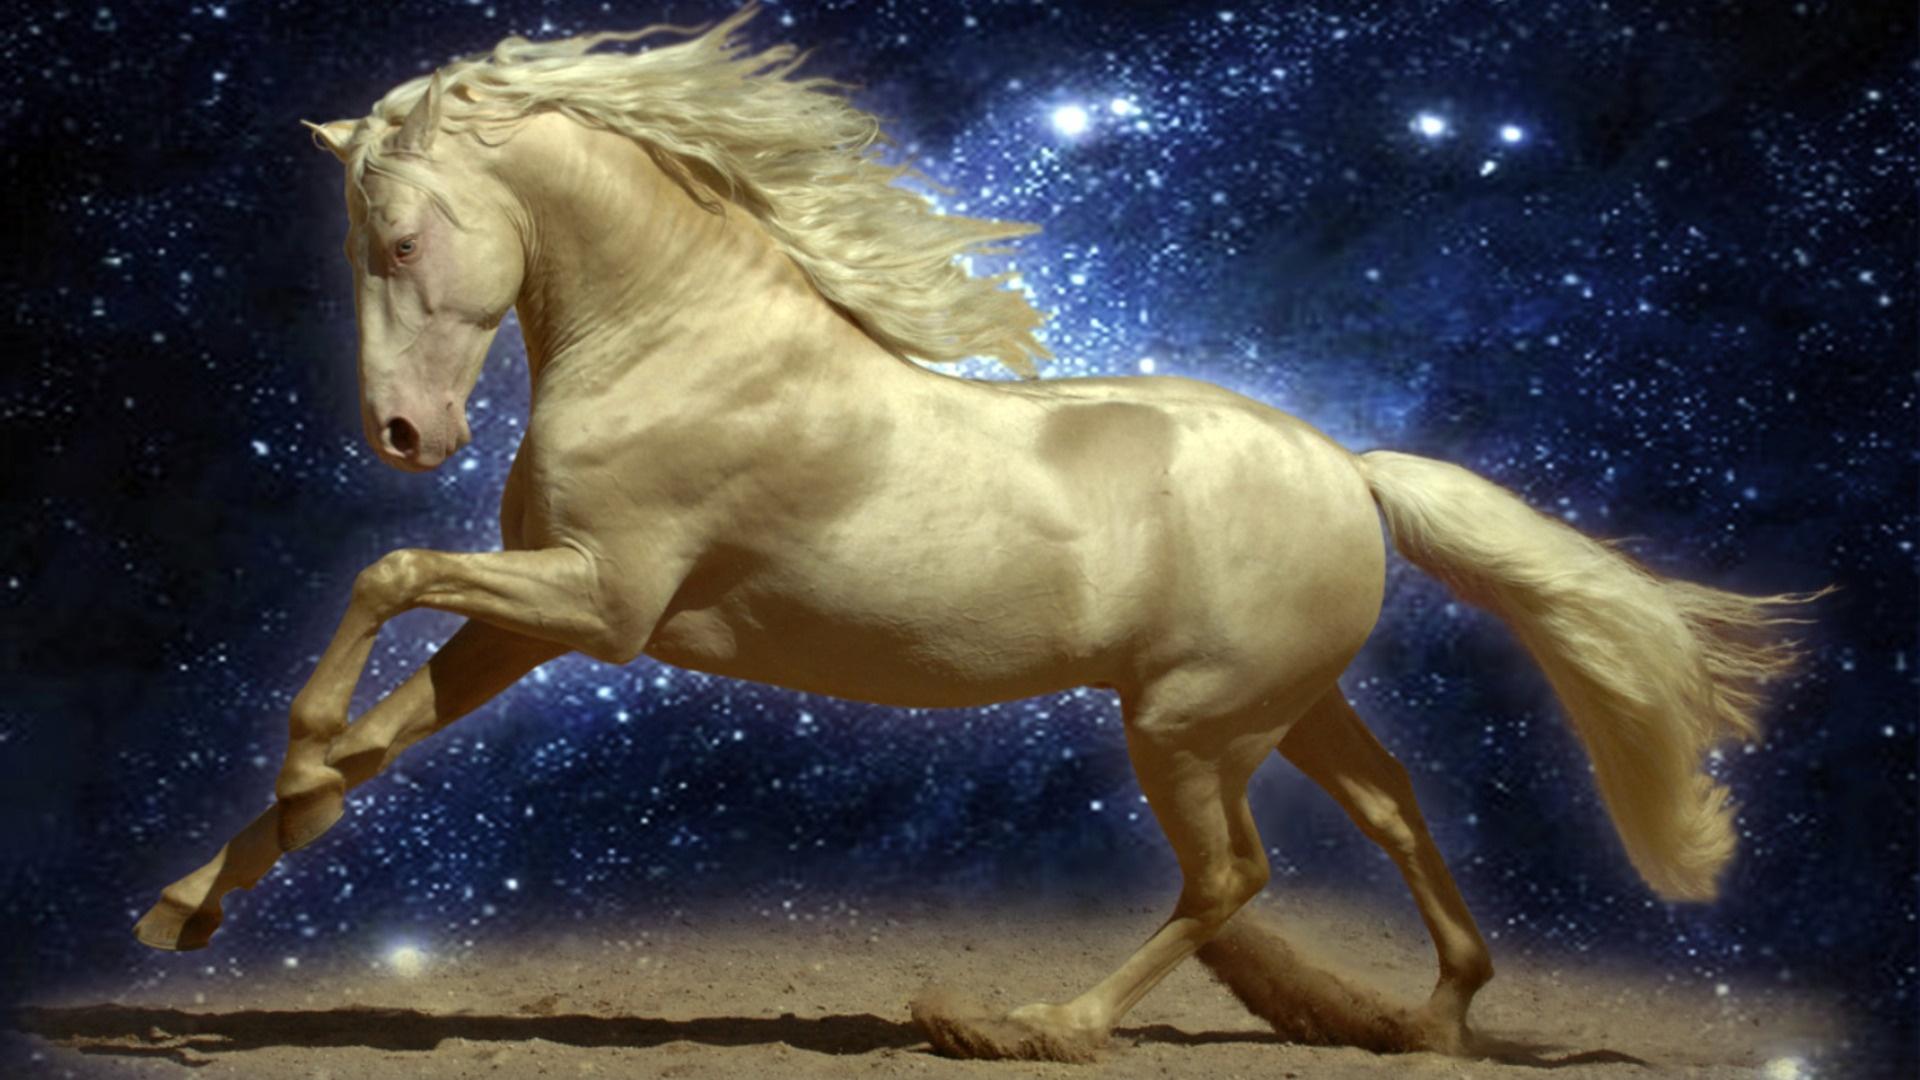 Download 3d Nature And Horse wallpaper by spring17  3f  Free on ZEDGE  now Browse millions of popular 3d Wallpapers   Horses Horse wallpaper  Horse background